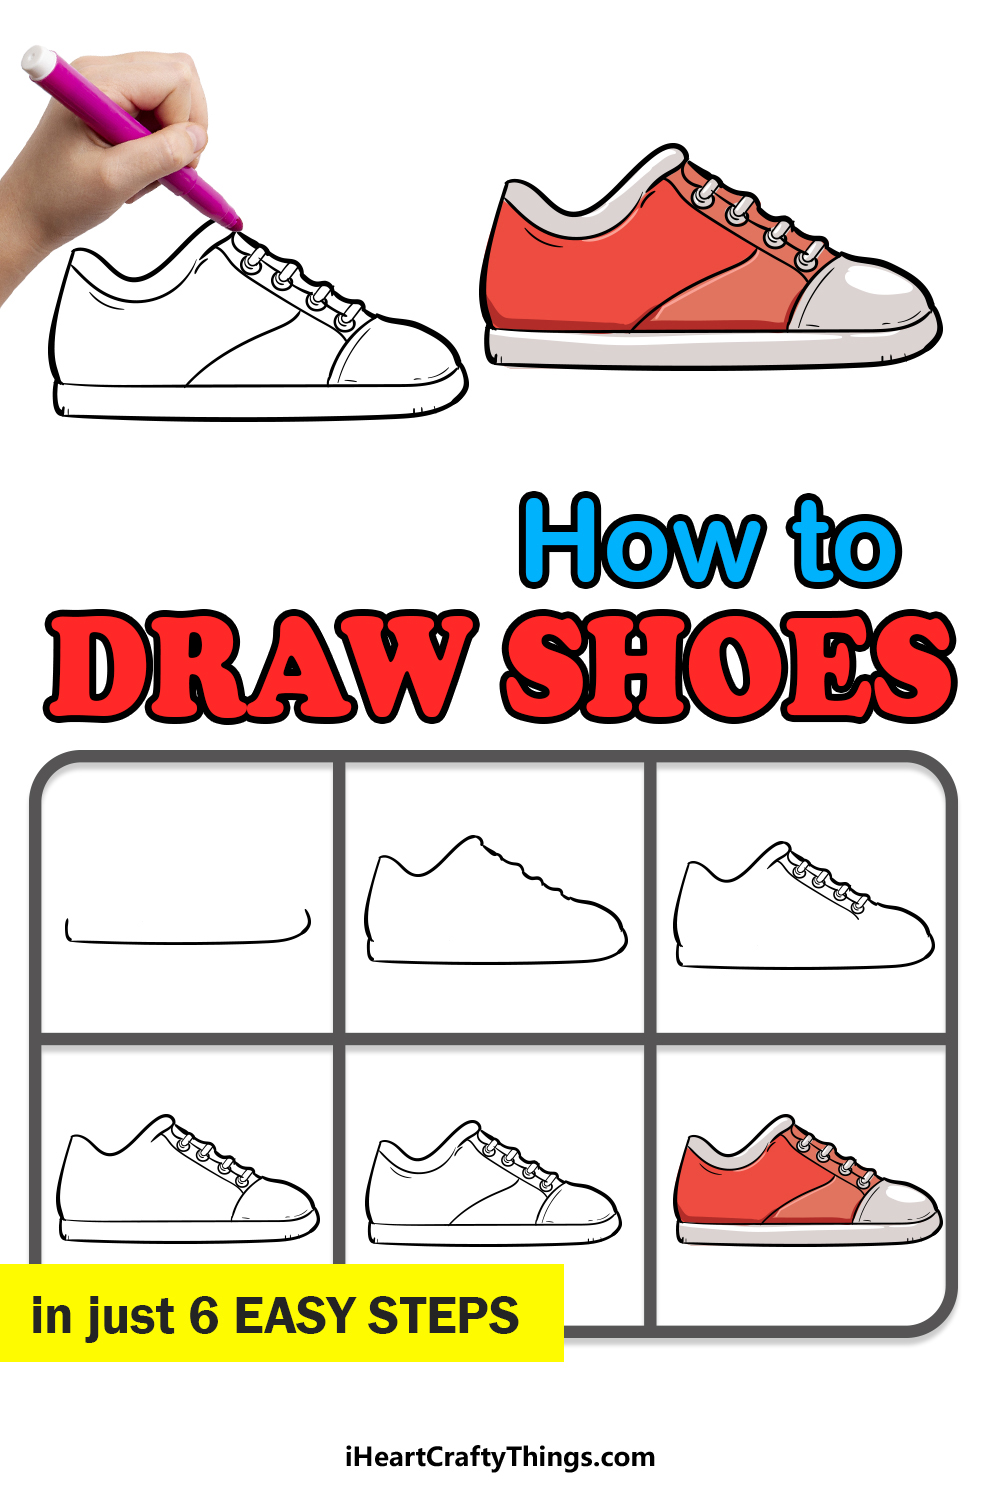 how to draw shoe in 6 easy steps